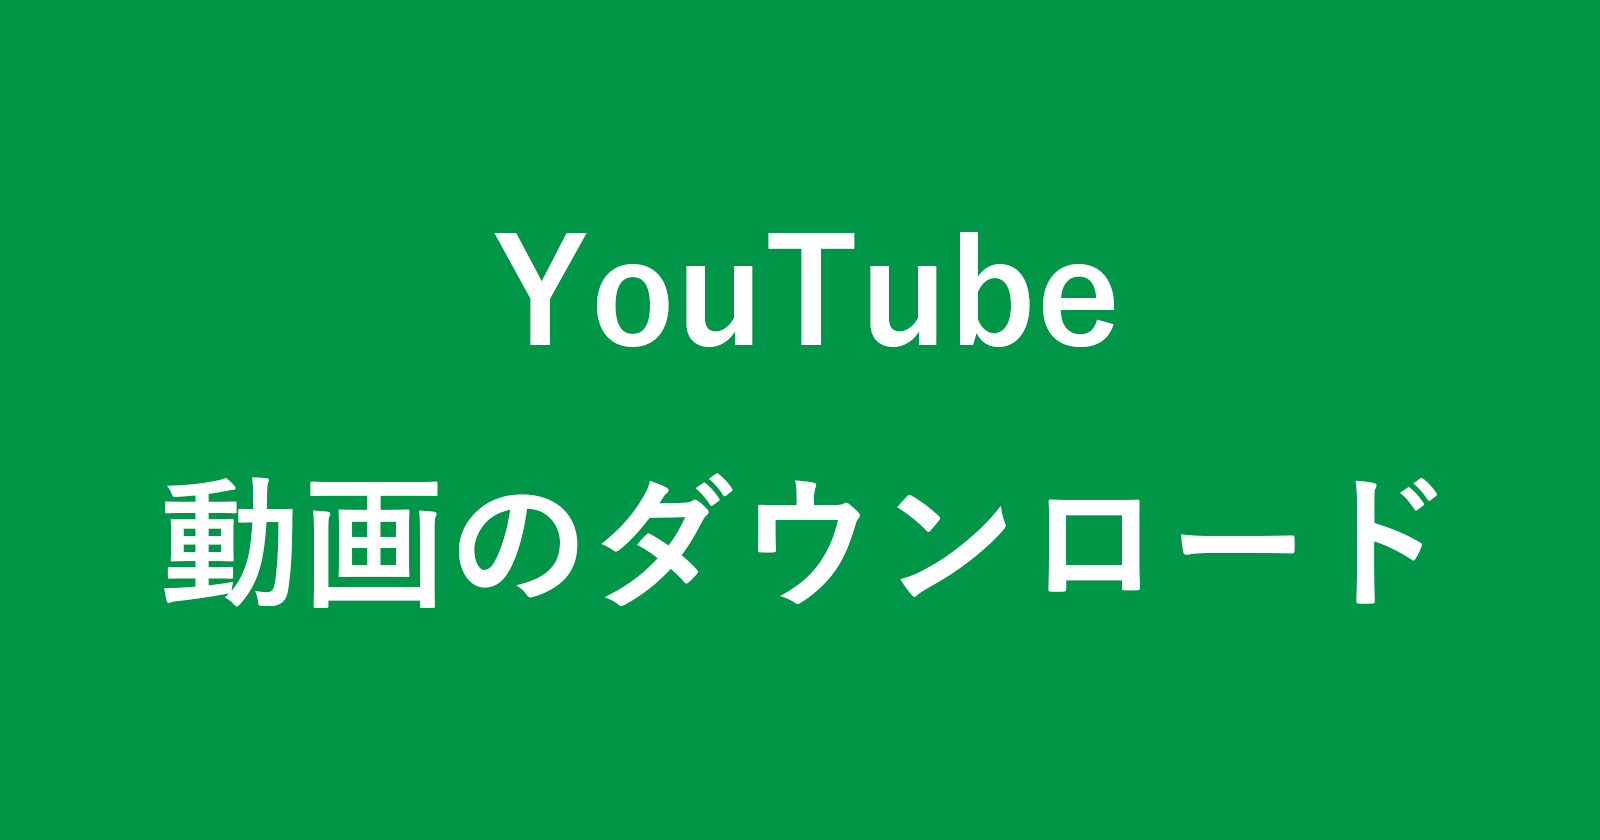 youtube download videos